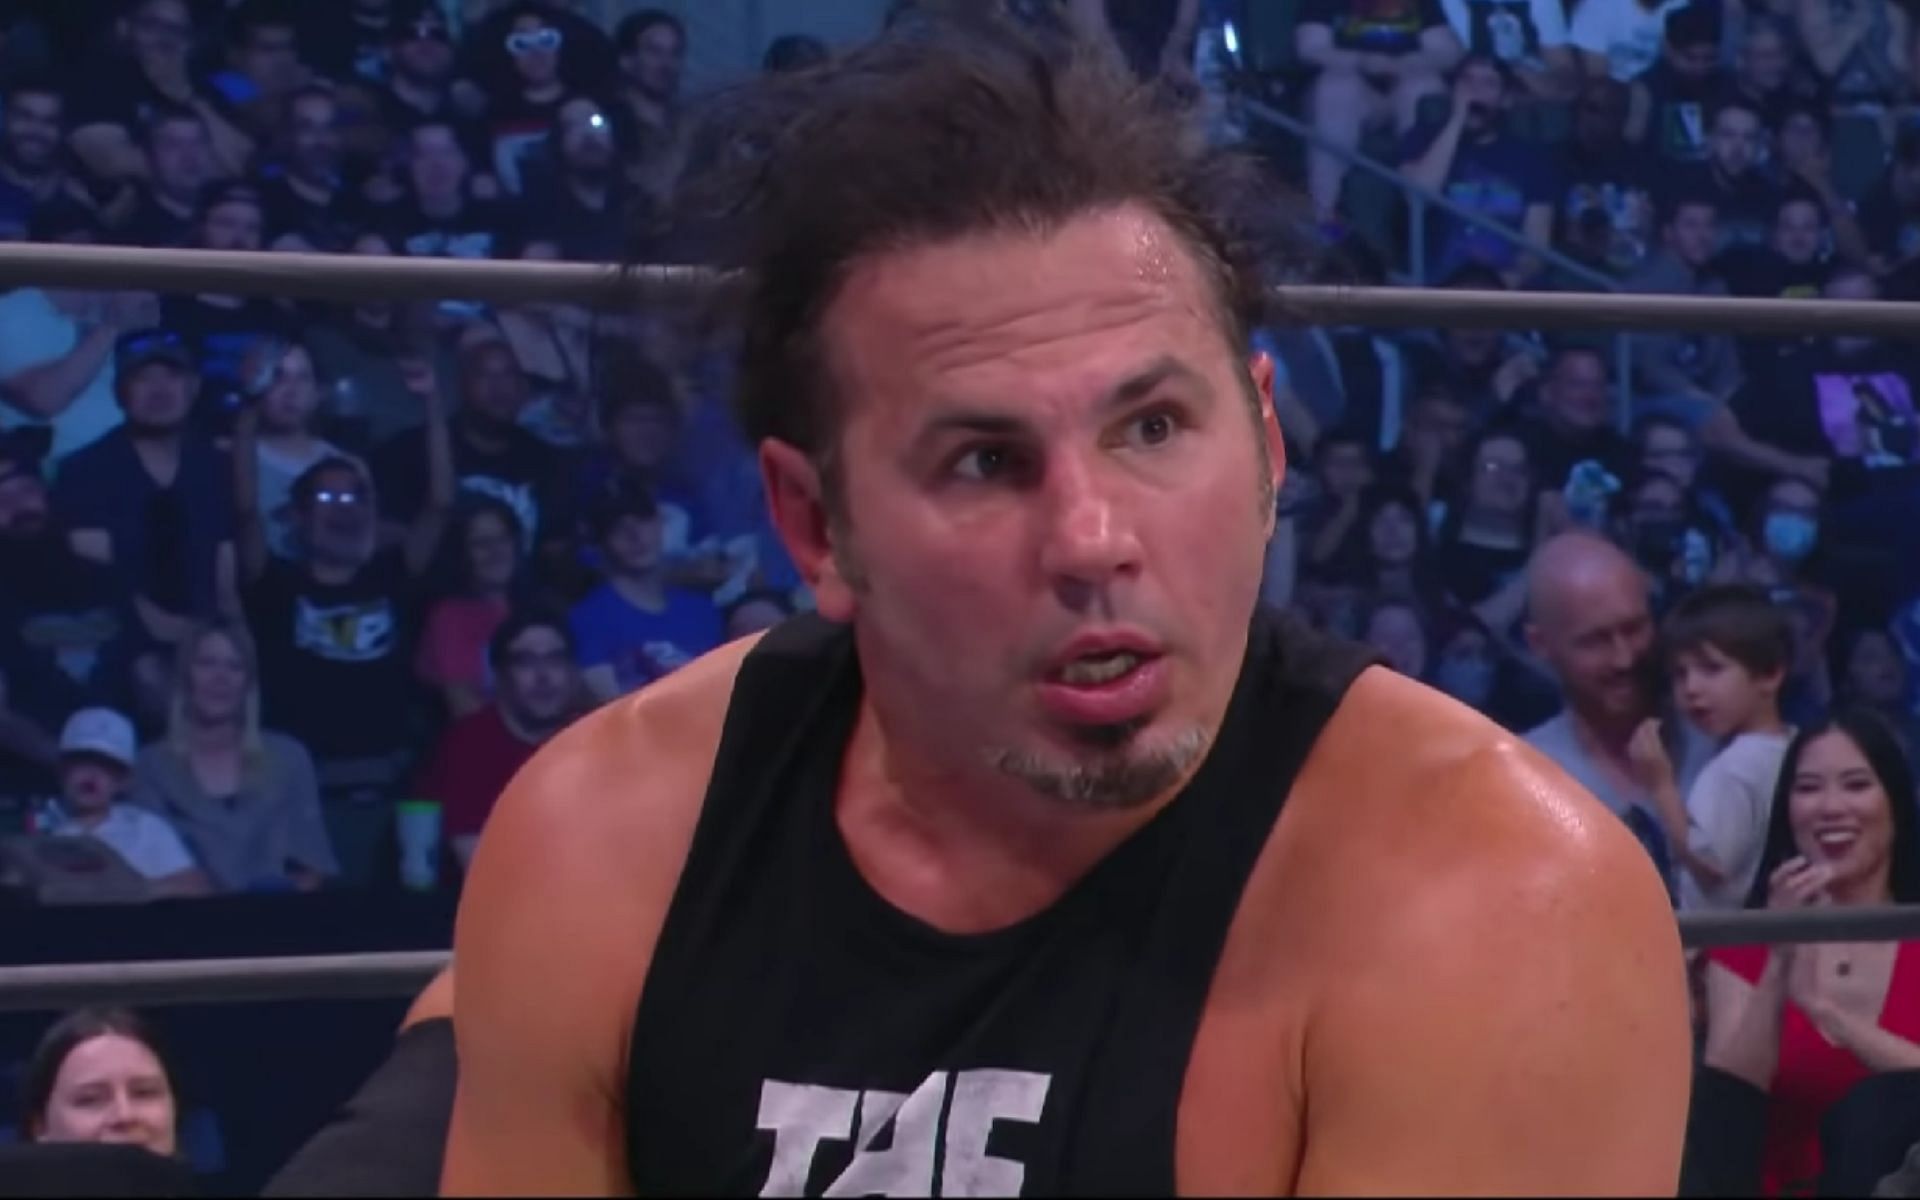 AEW star Matt Hardy took part in the Royal Rampage last Friday.